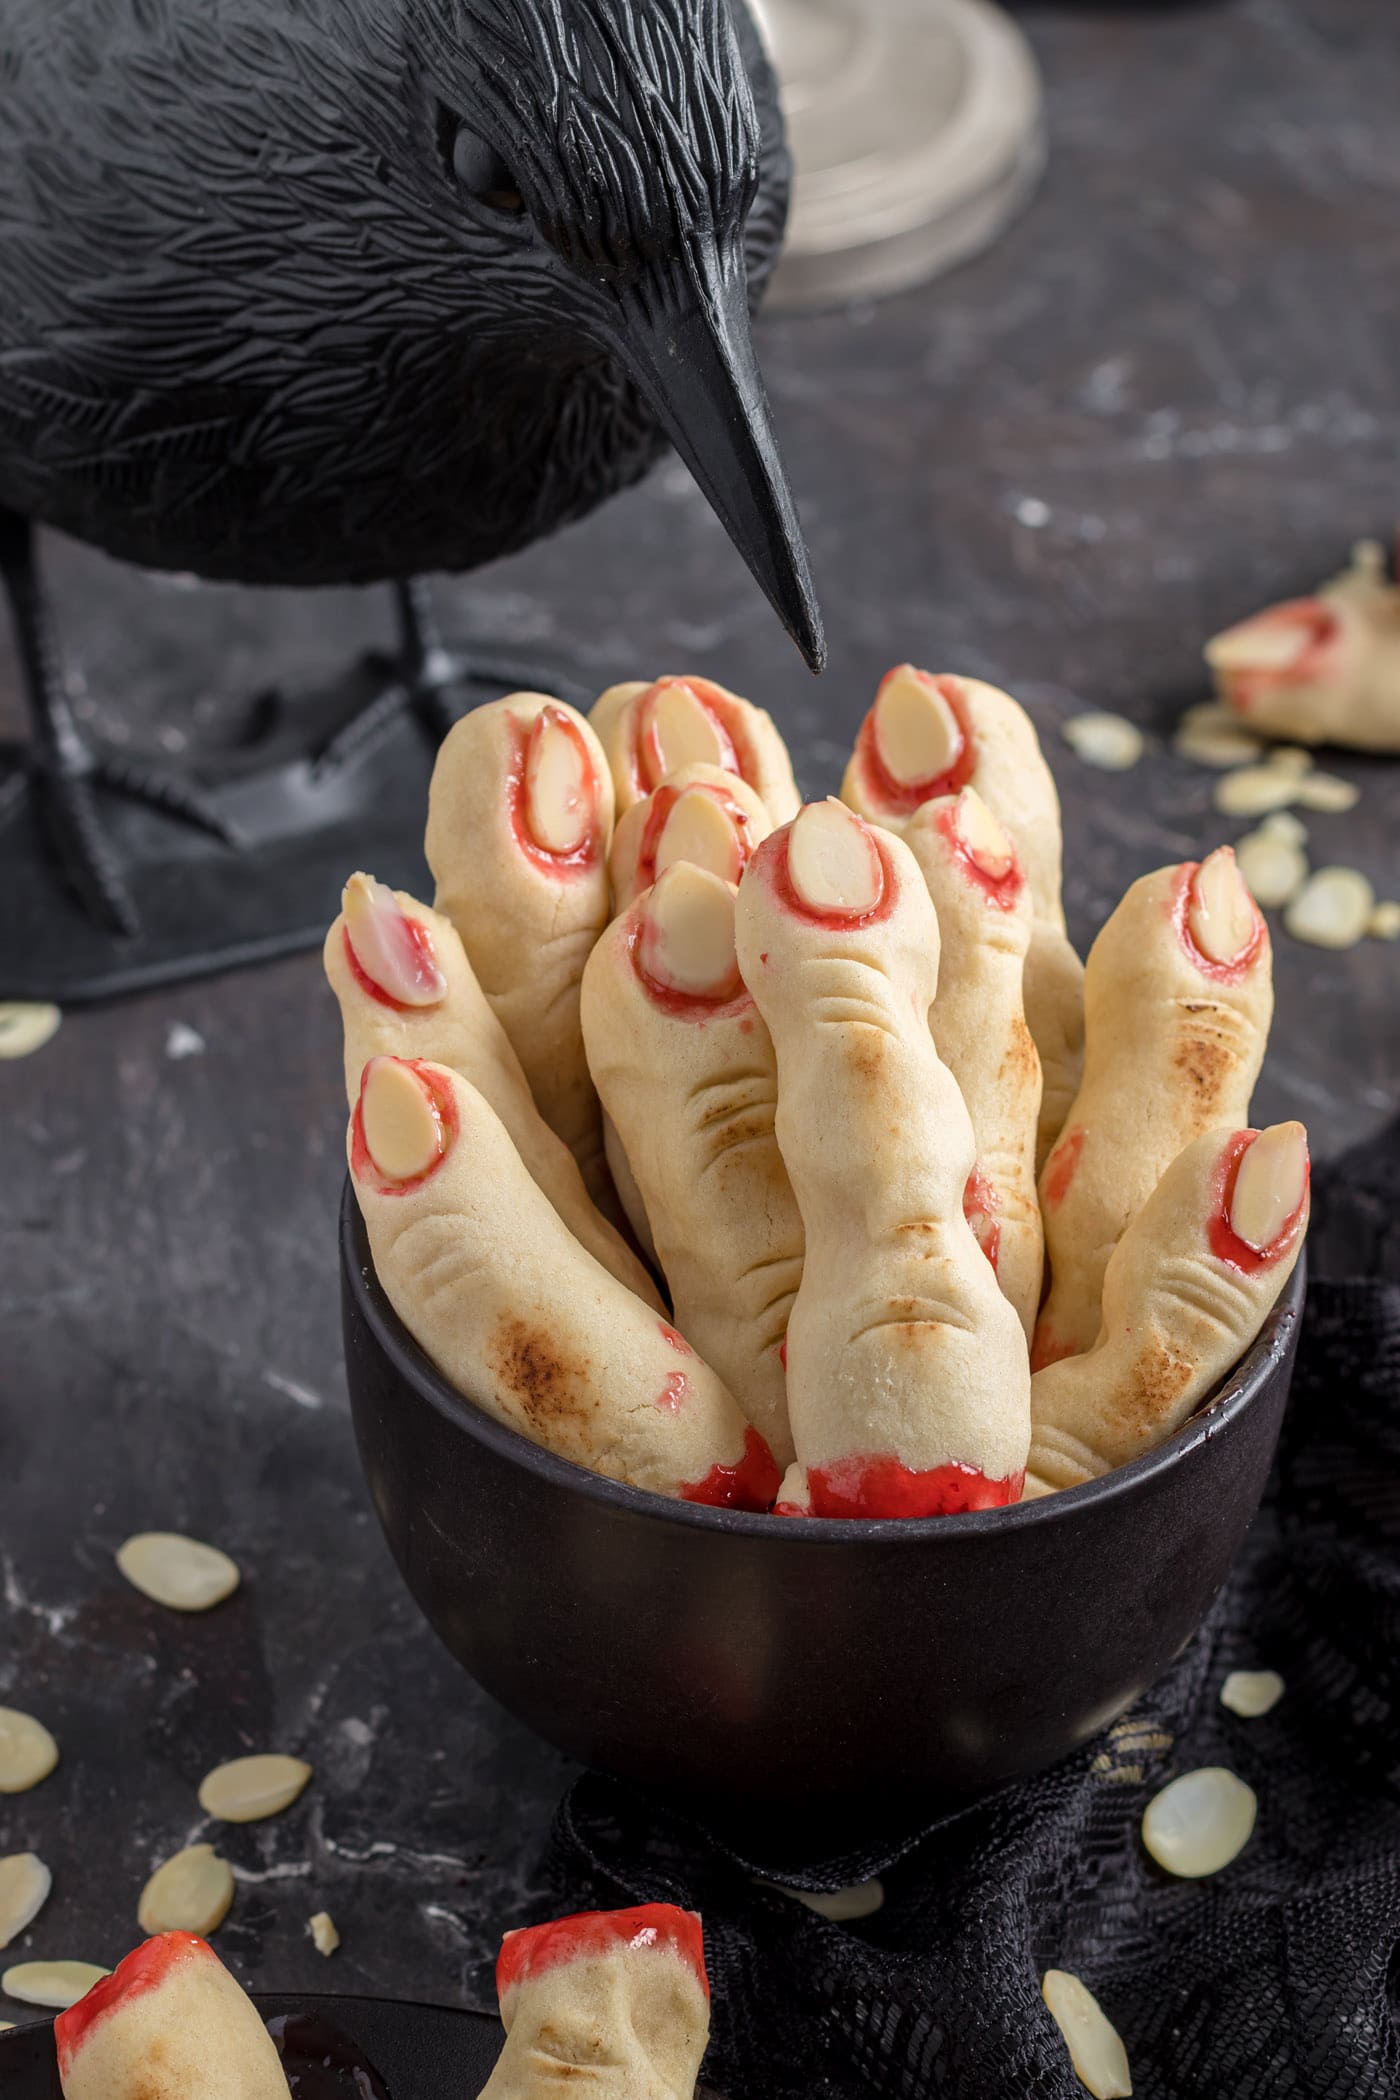 Witch finger cookies with strawberry jam and sliced almonds